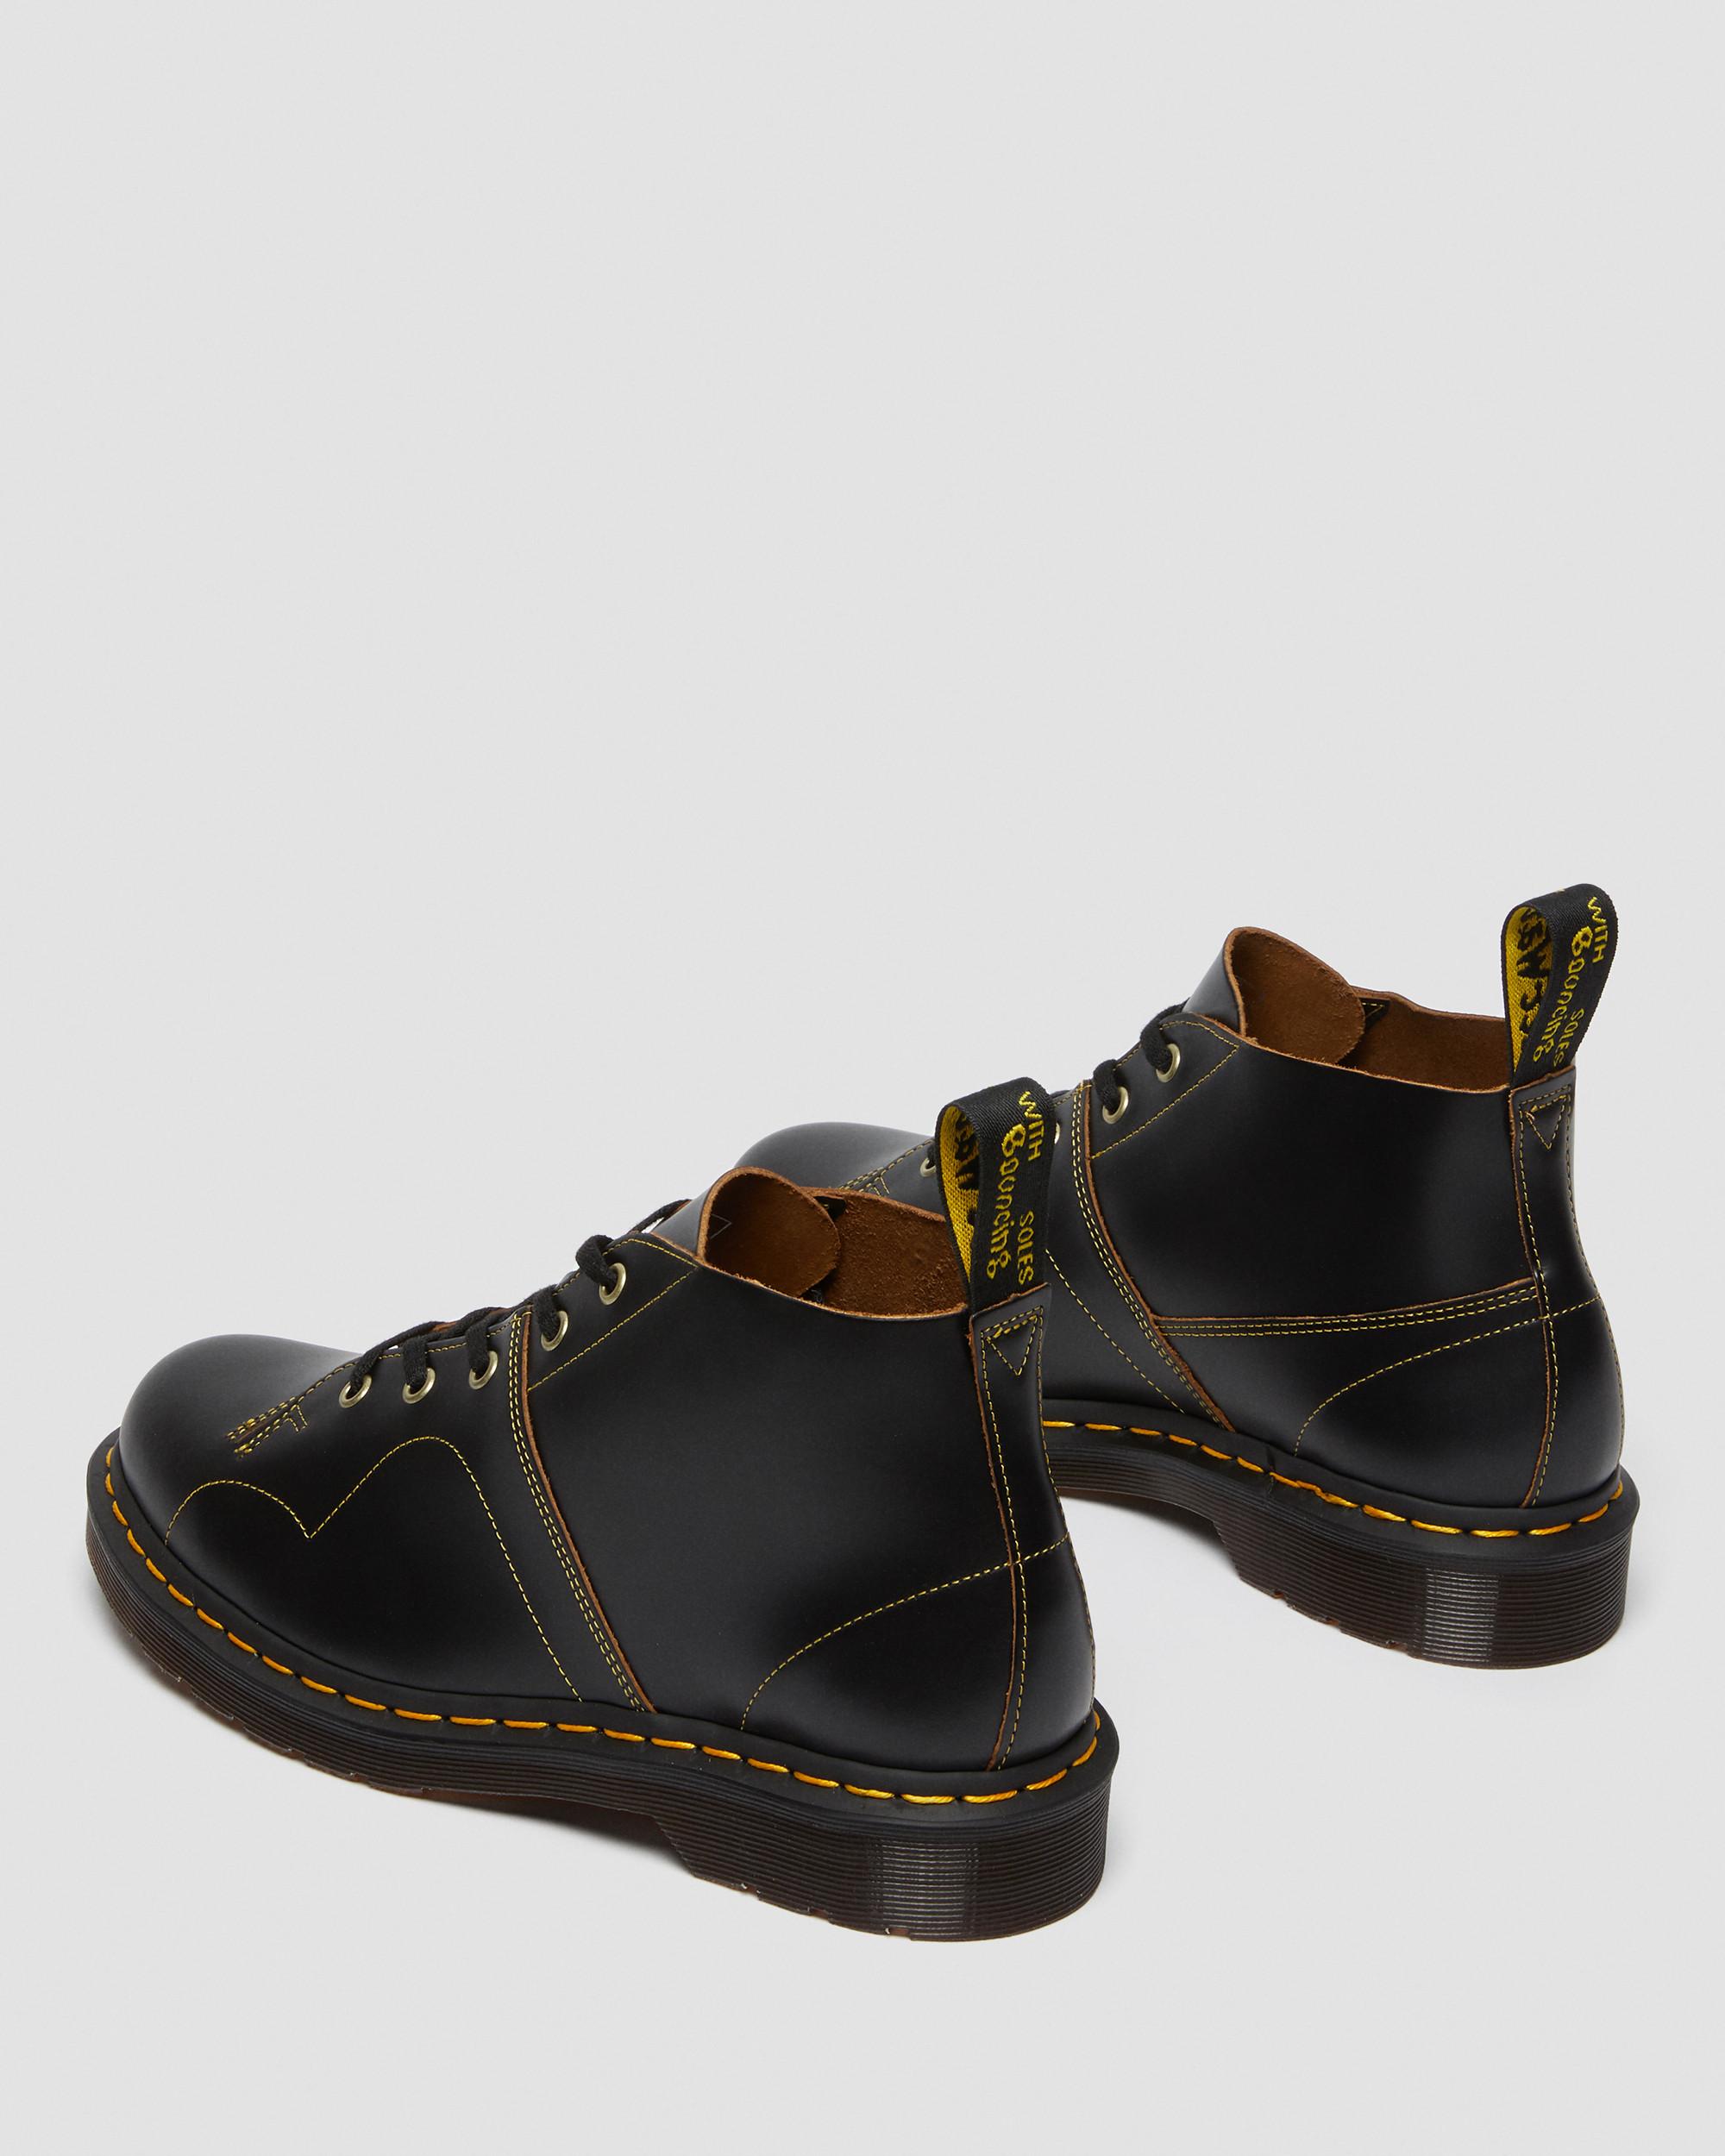 CHURCH LEATHER MONKEY BOOTS | Dr 